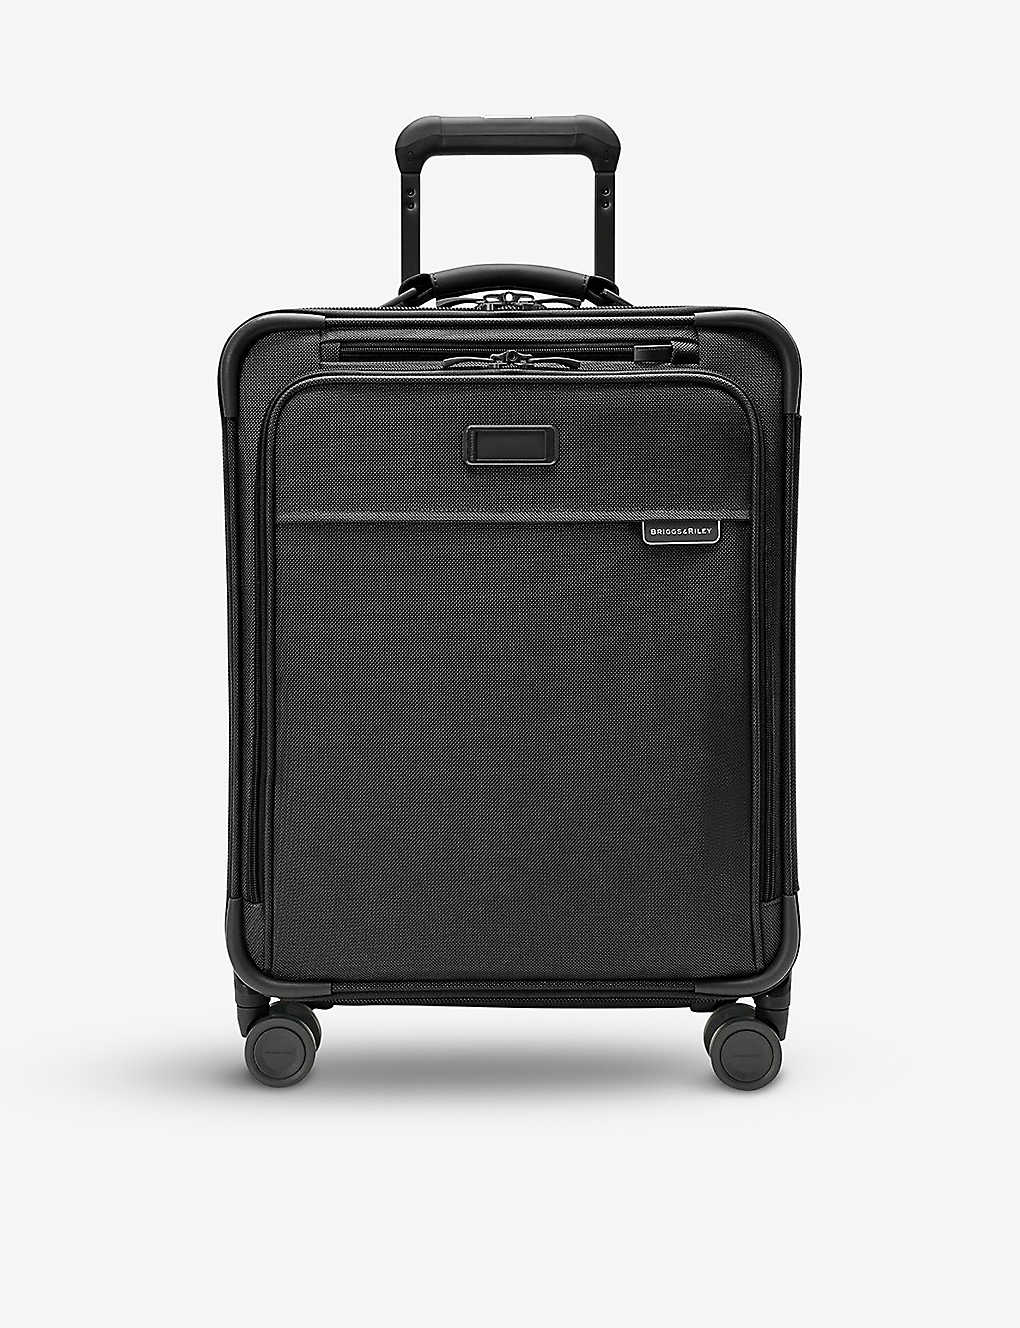 selfridges.com | BRIGGS & RILEY Global carry-on spinner shell suitcase 53.3cm